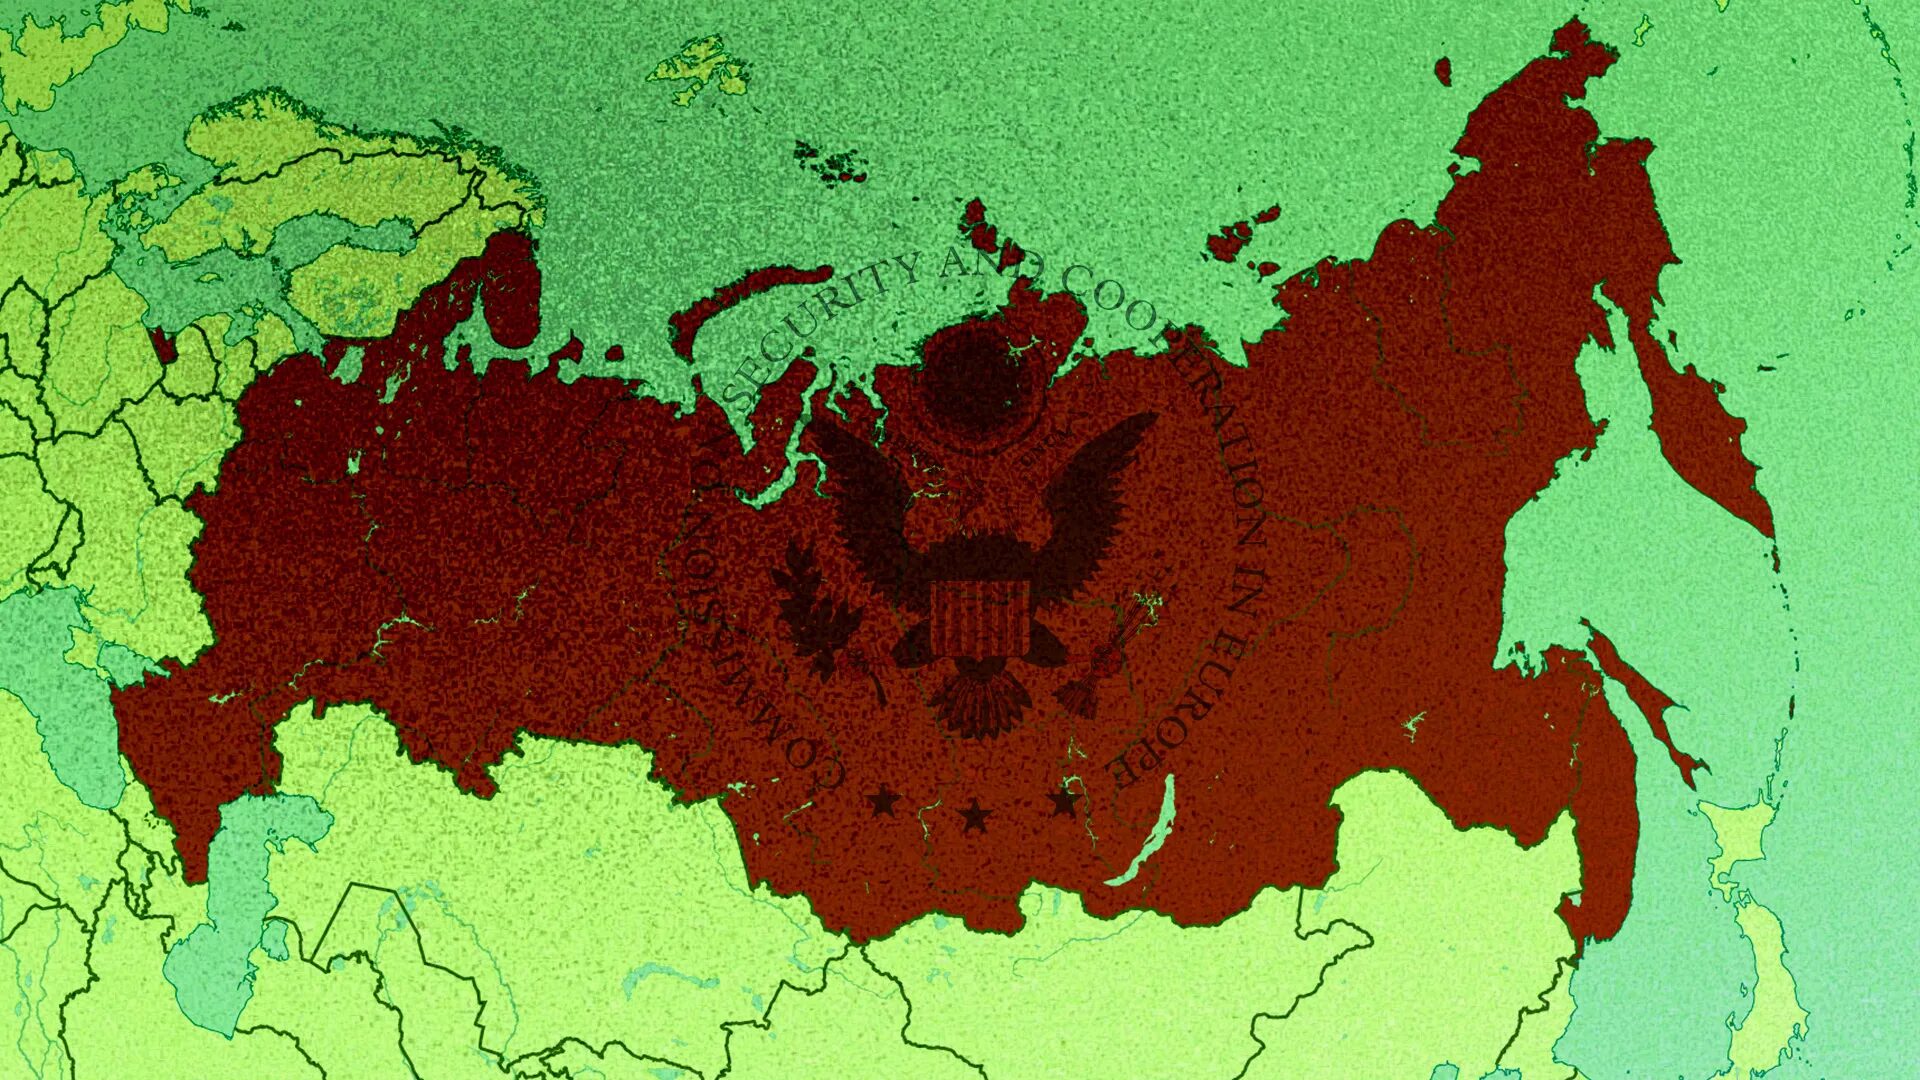 Russia map